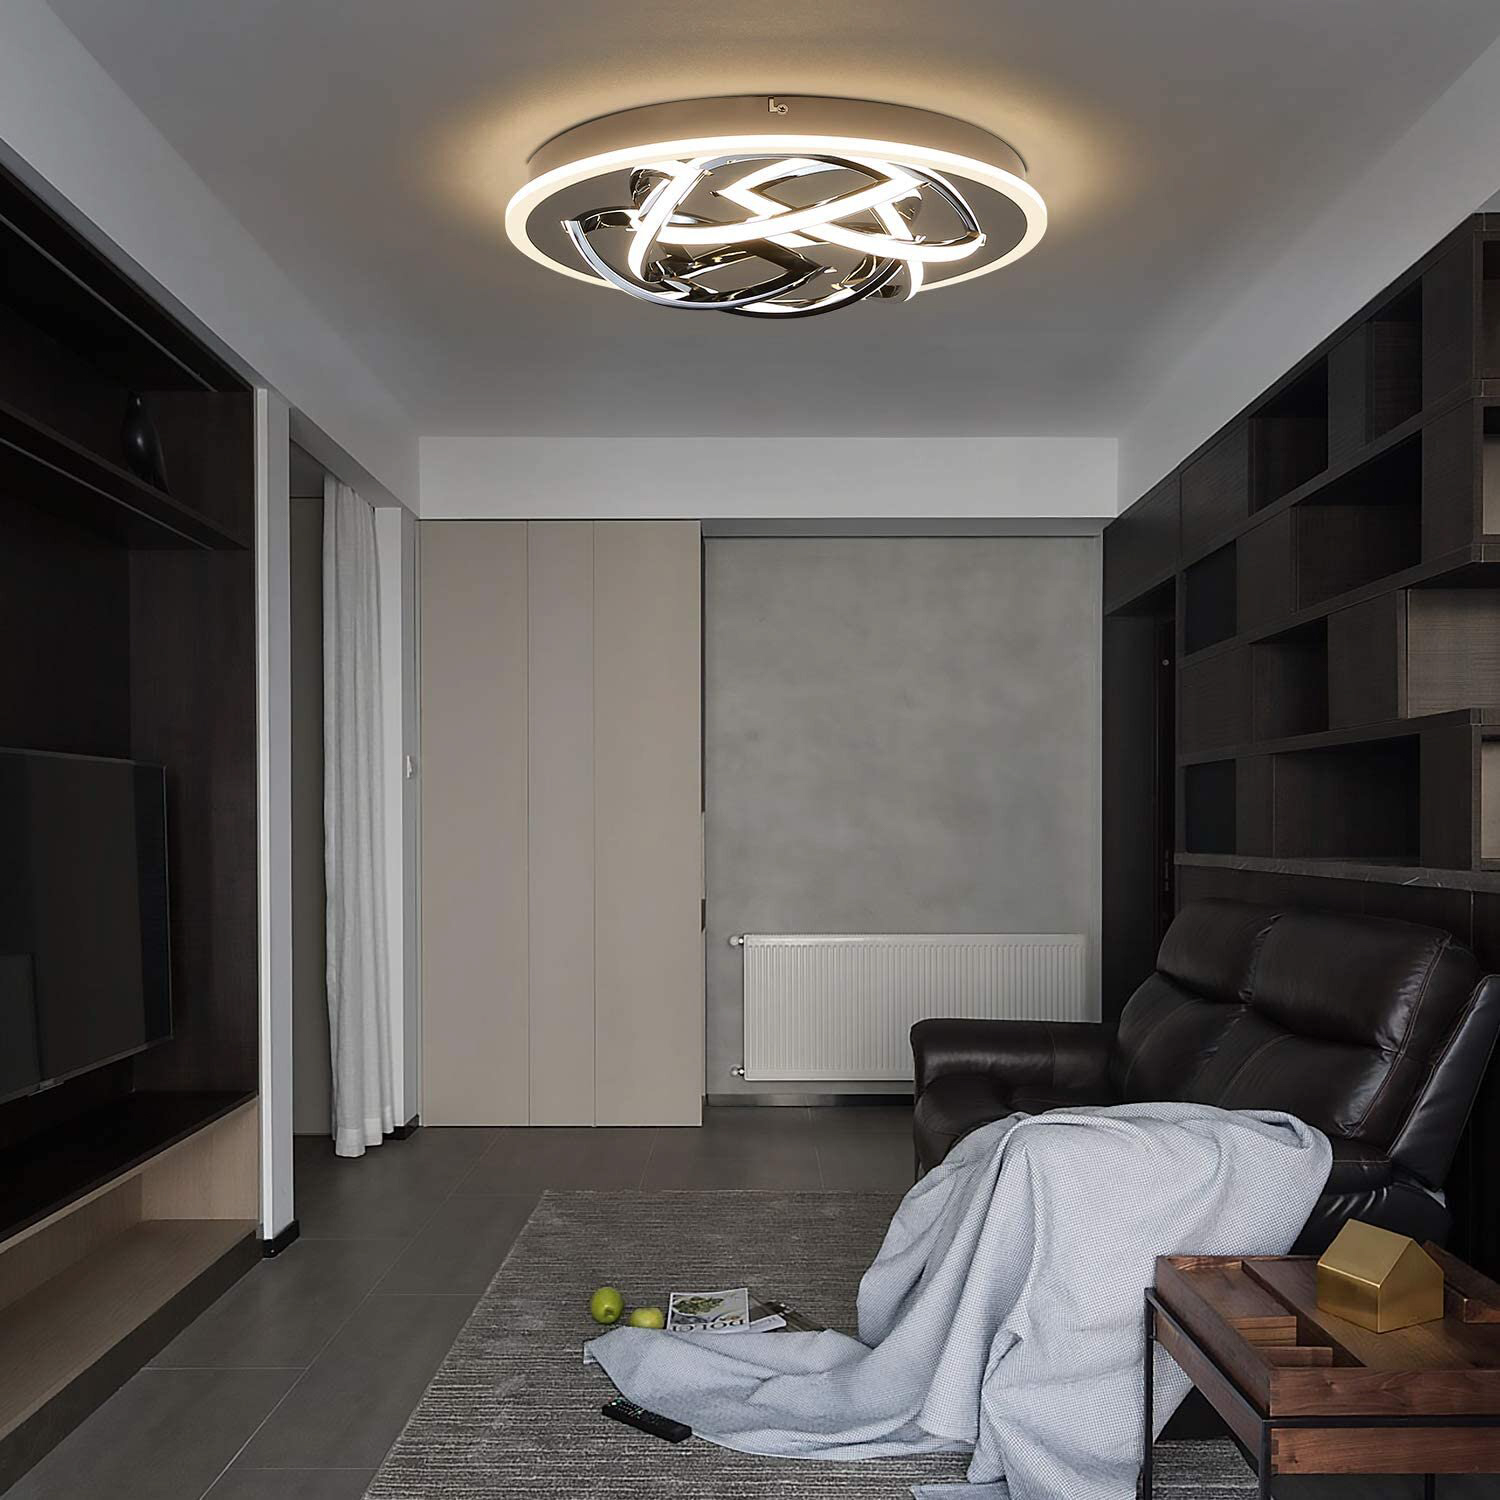 Bringing Elegance and Brightness to Your Space: The White Flush Ceiling Light